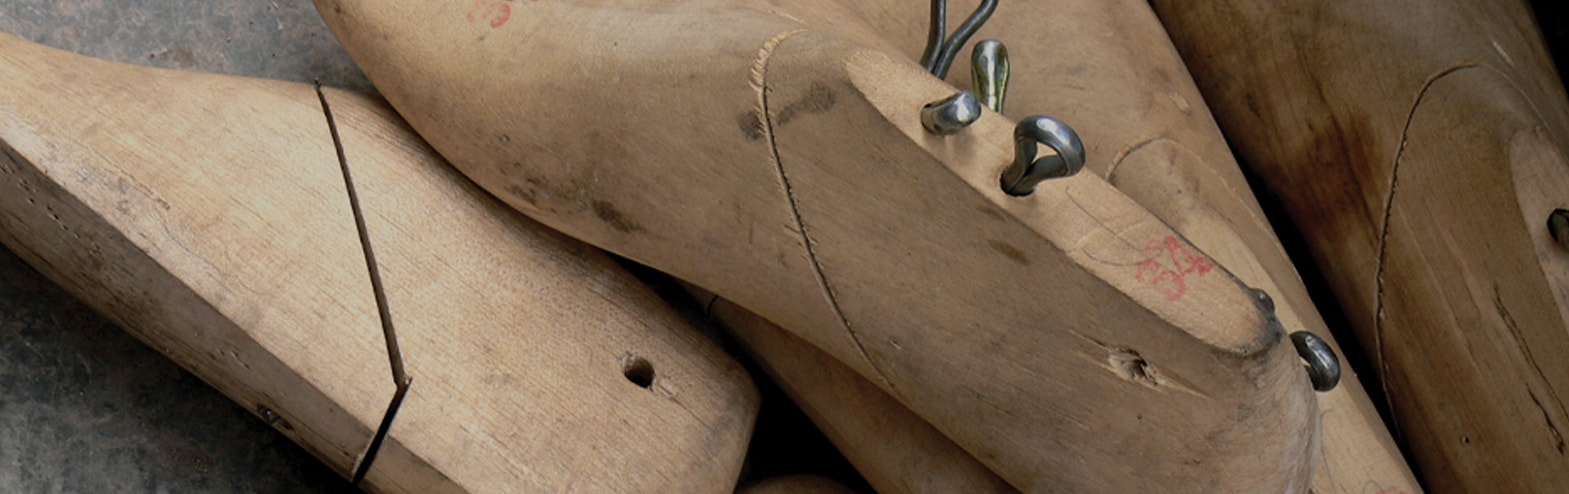 Sustainability. The featured image includes wooden shoe trees.